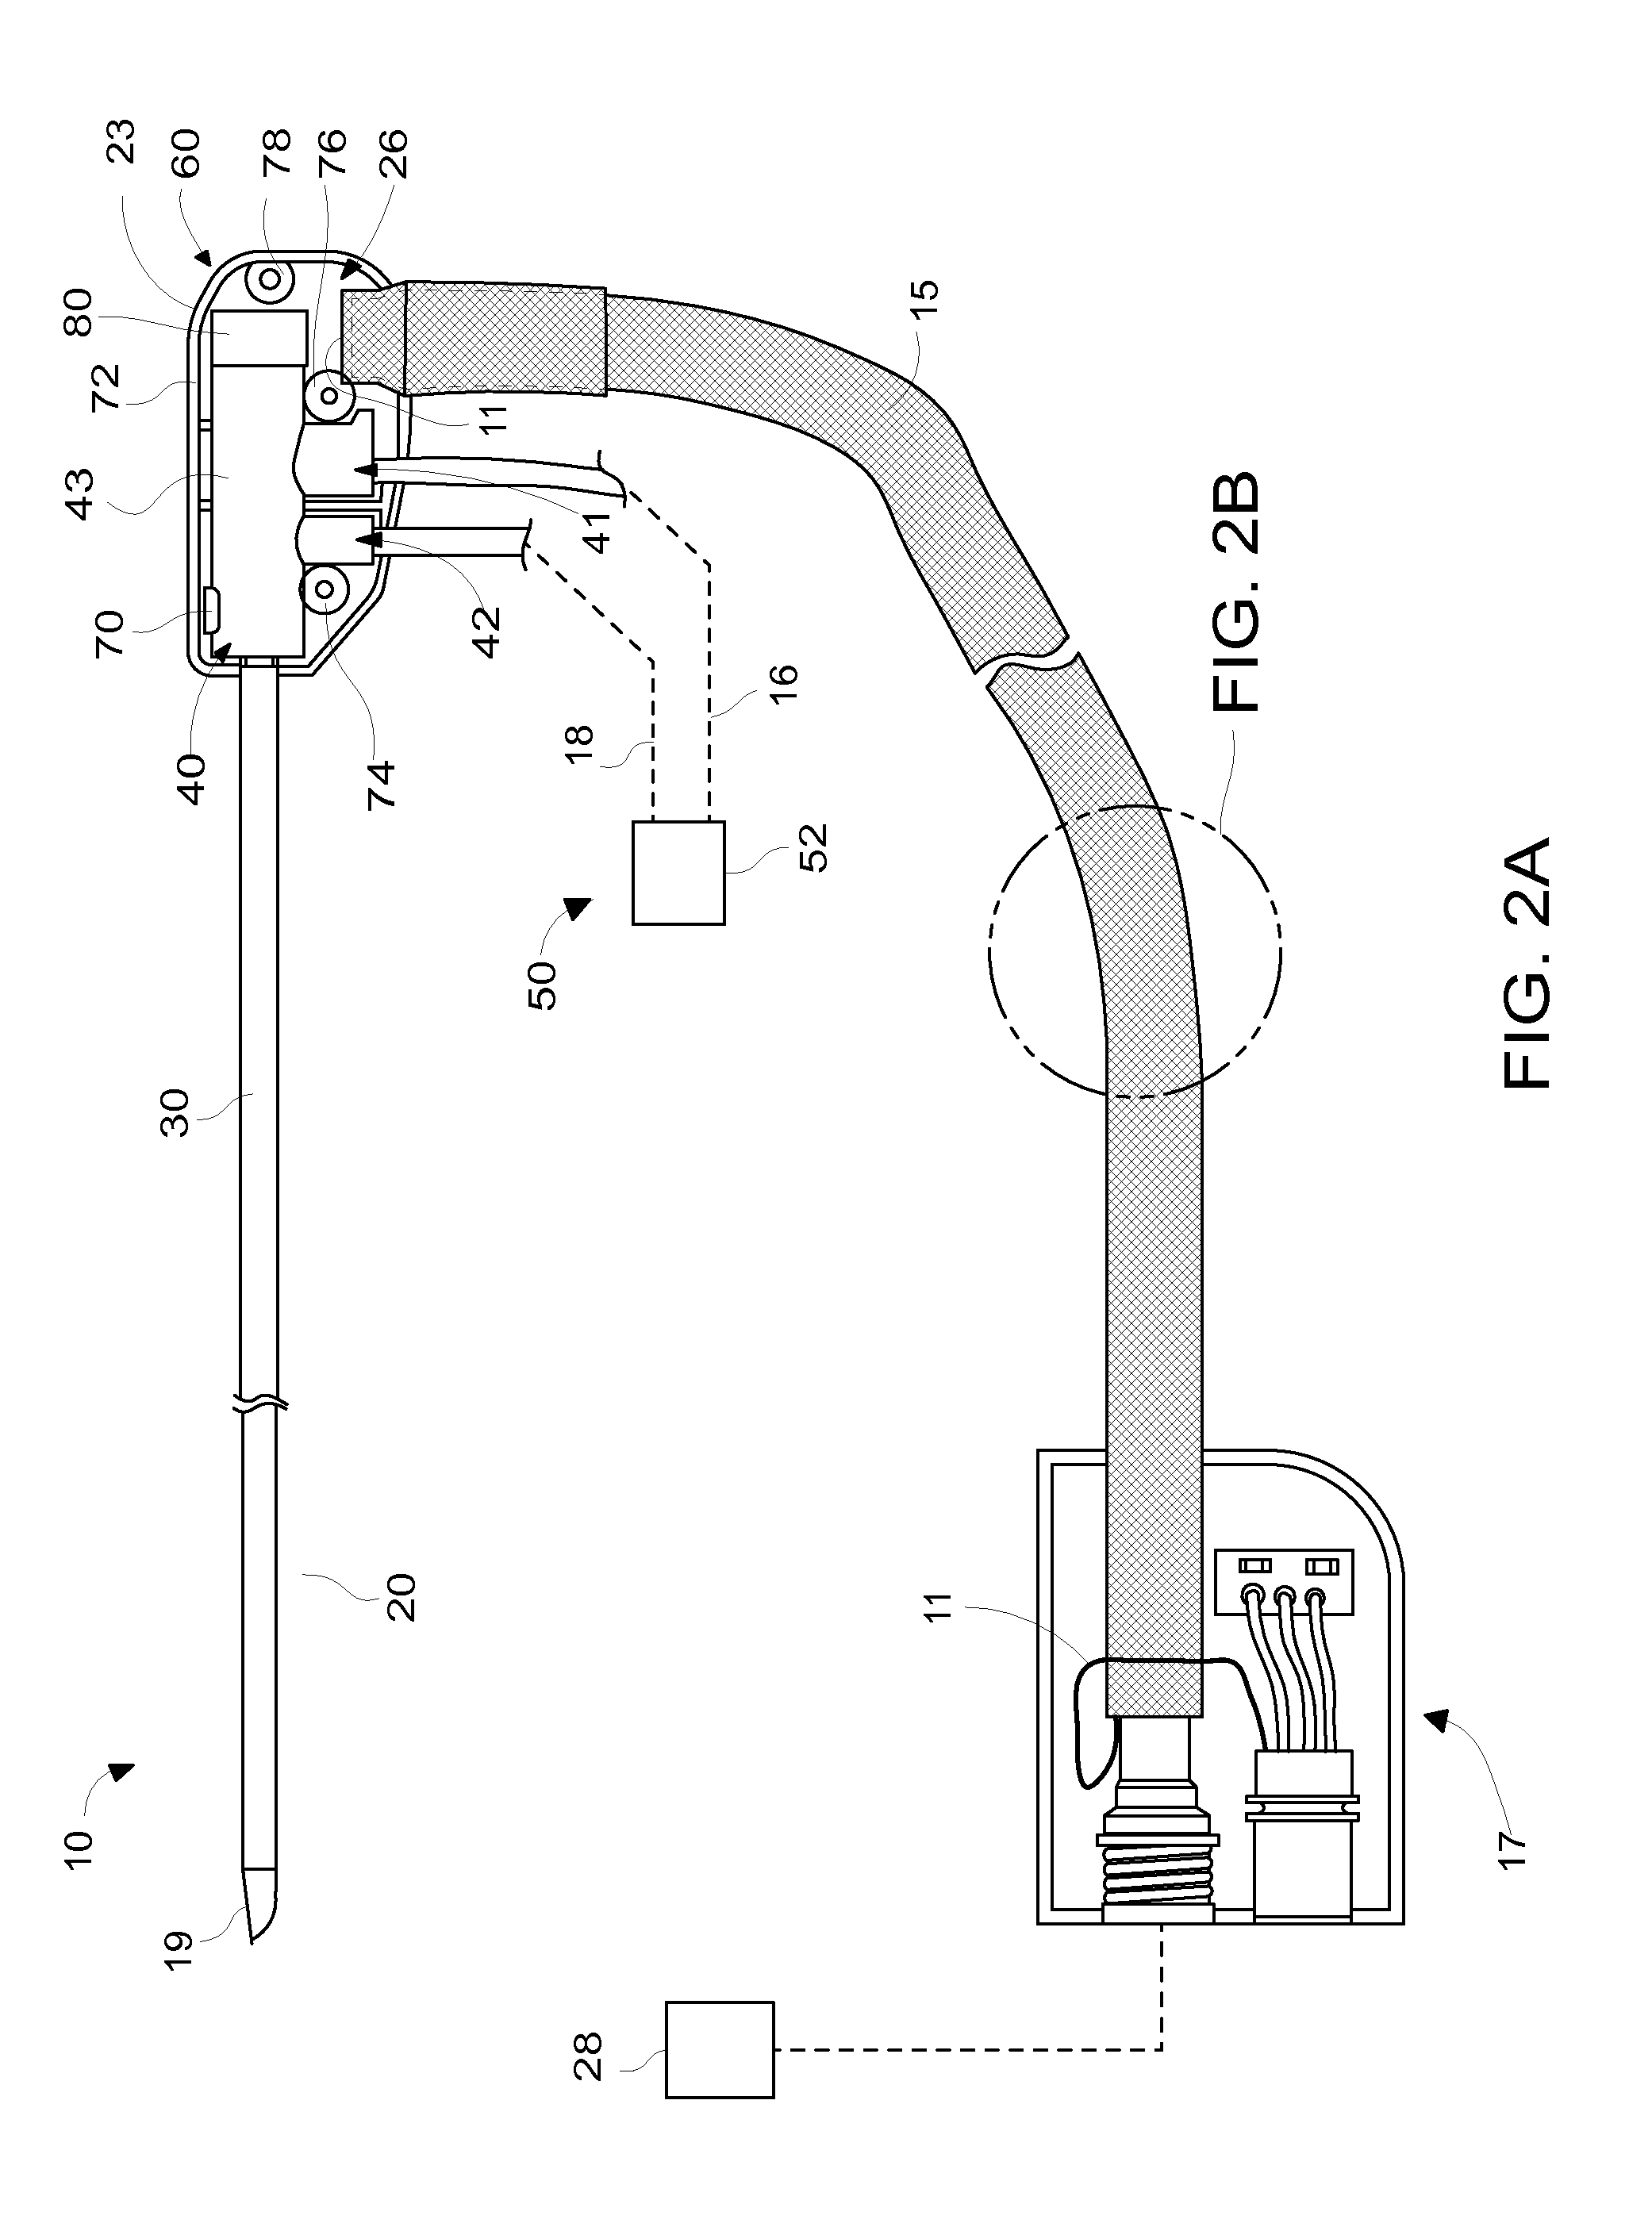 Microwave energy-delivery device and system